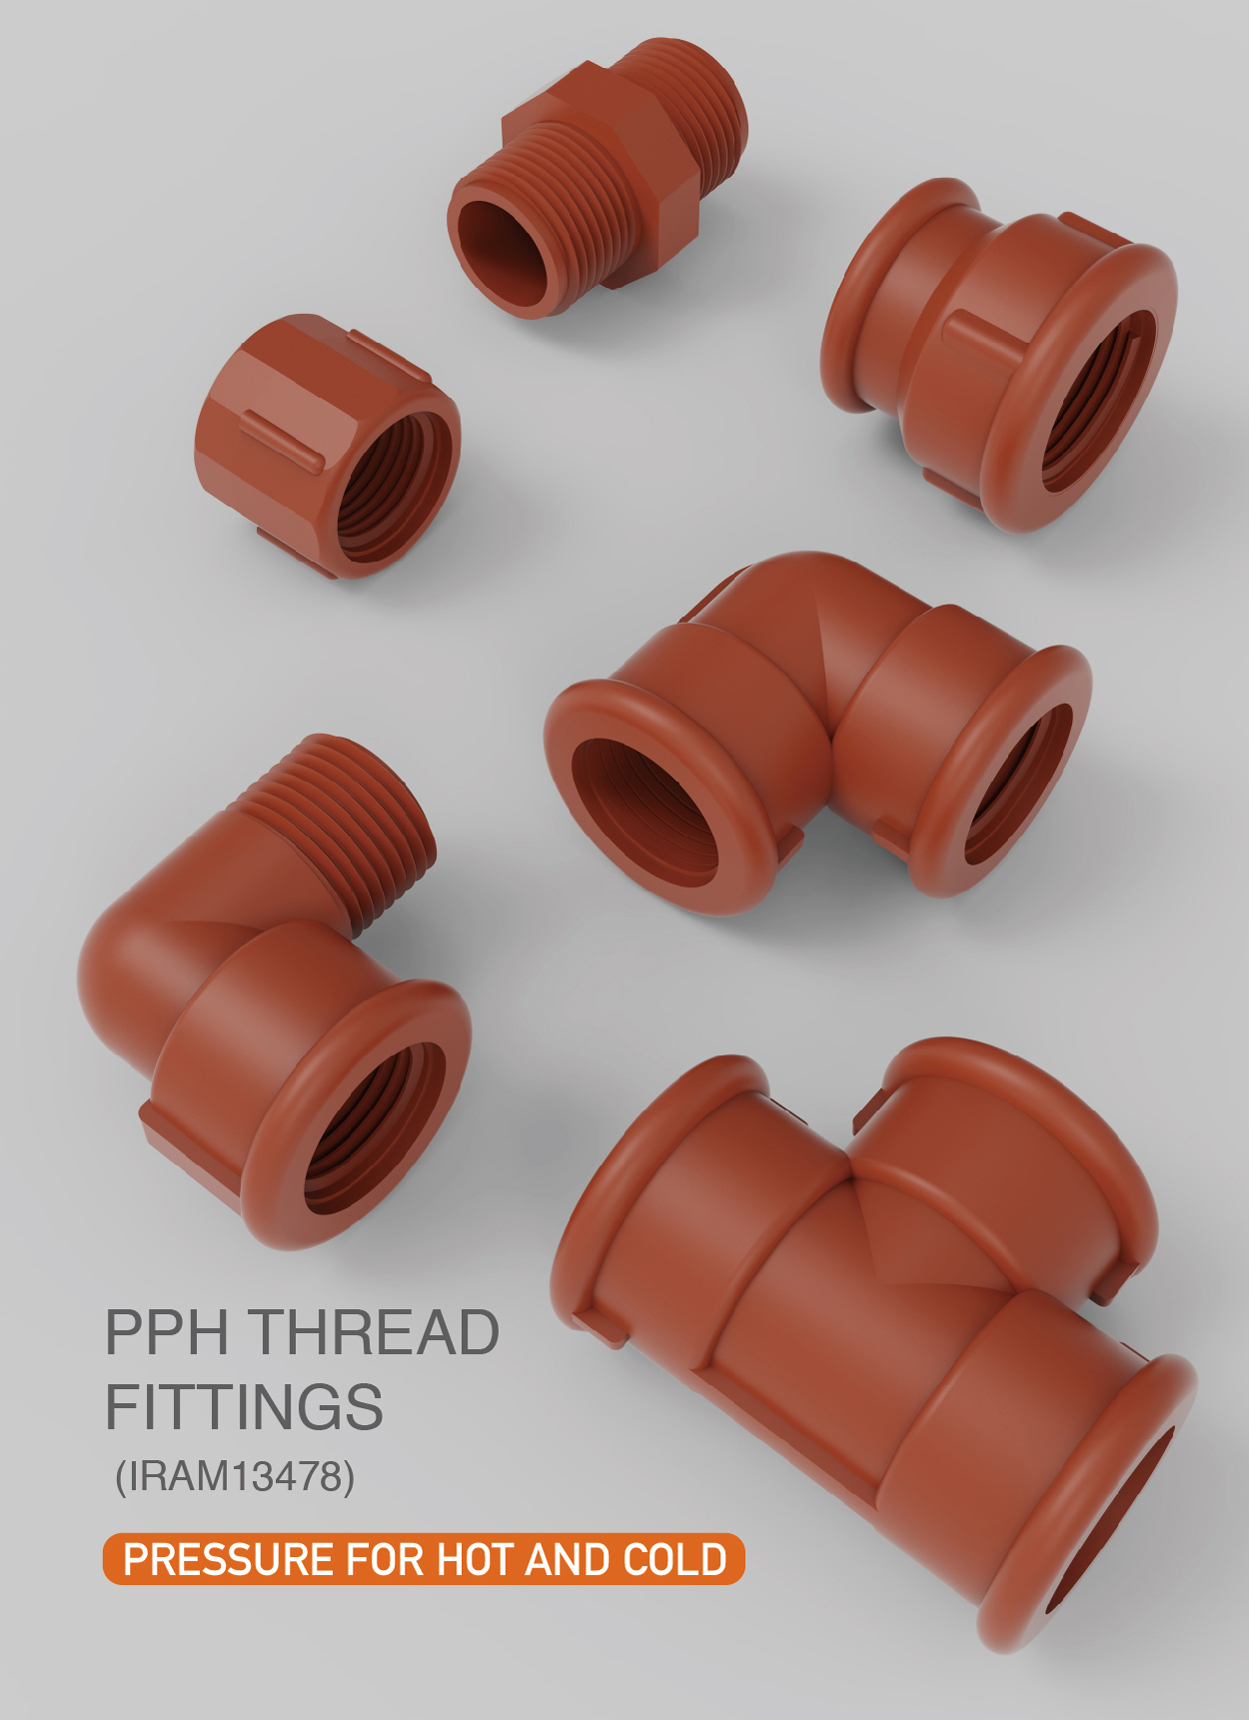 PPH THREAD FITTINGS FOR HOT & COLD WATER